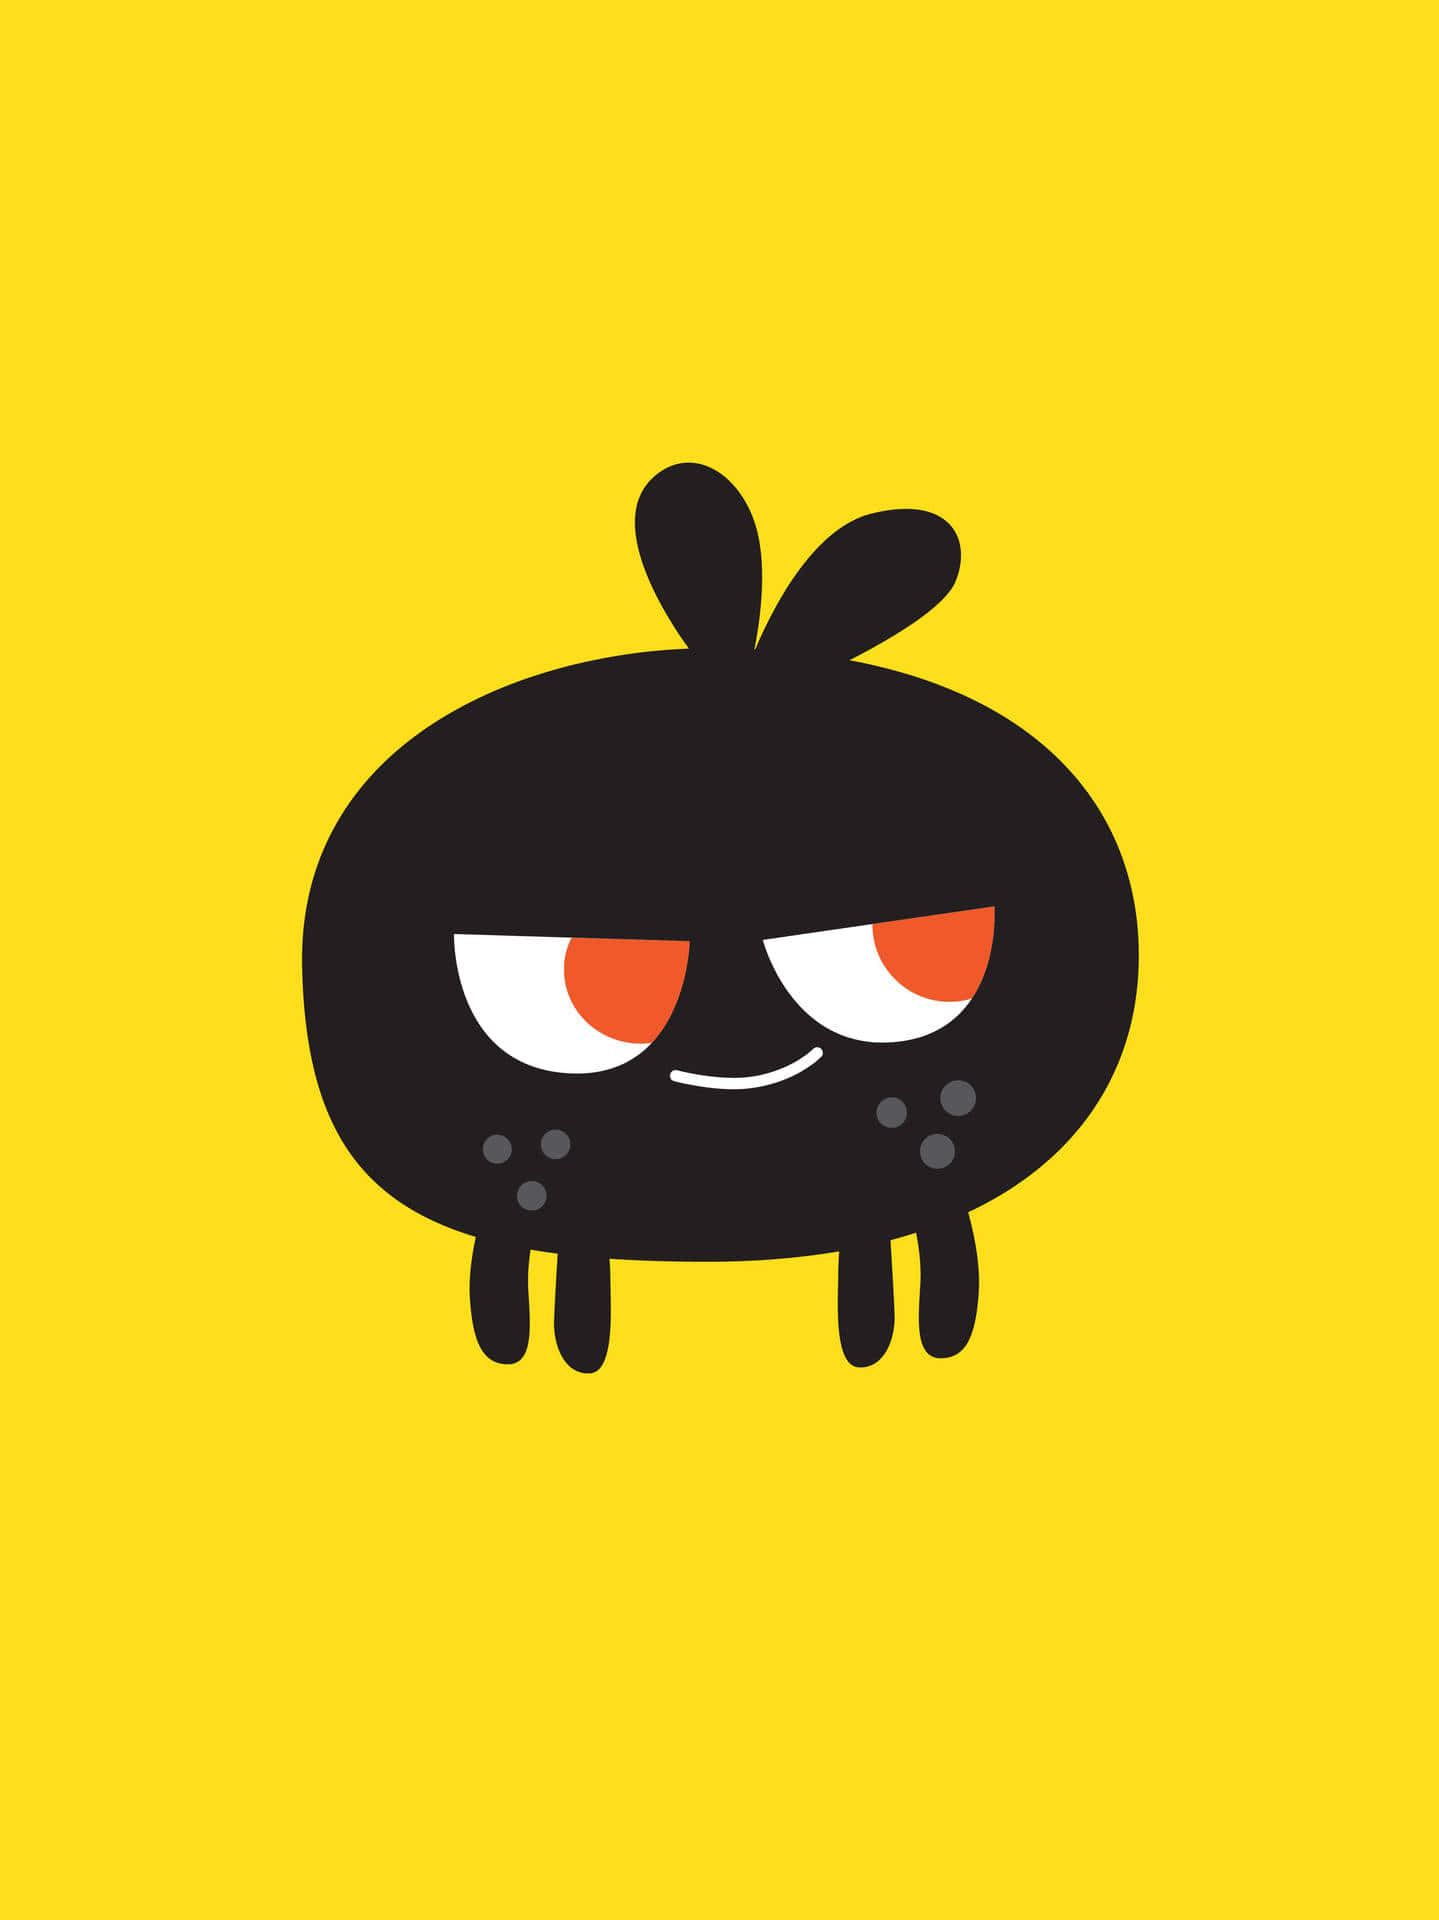 A Black Cartoon Character With Red Eyes On A Yellow Background